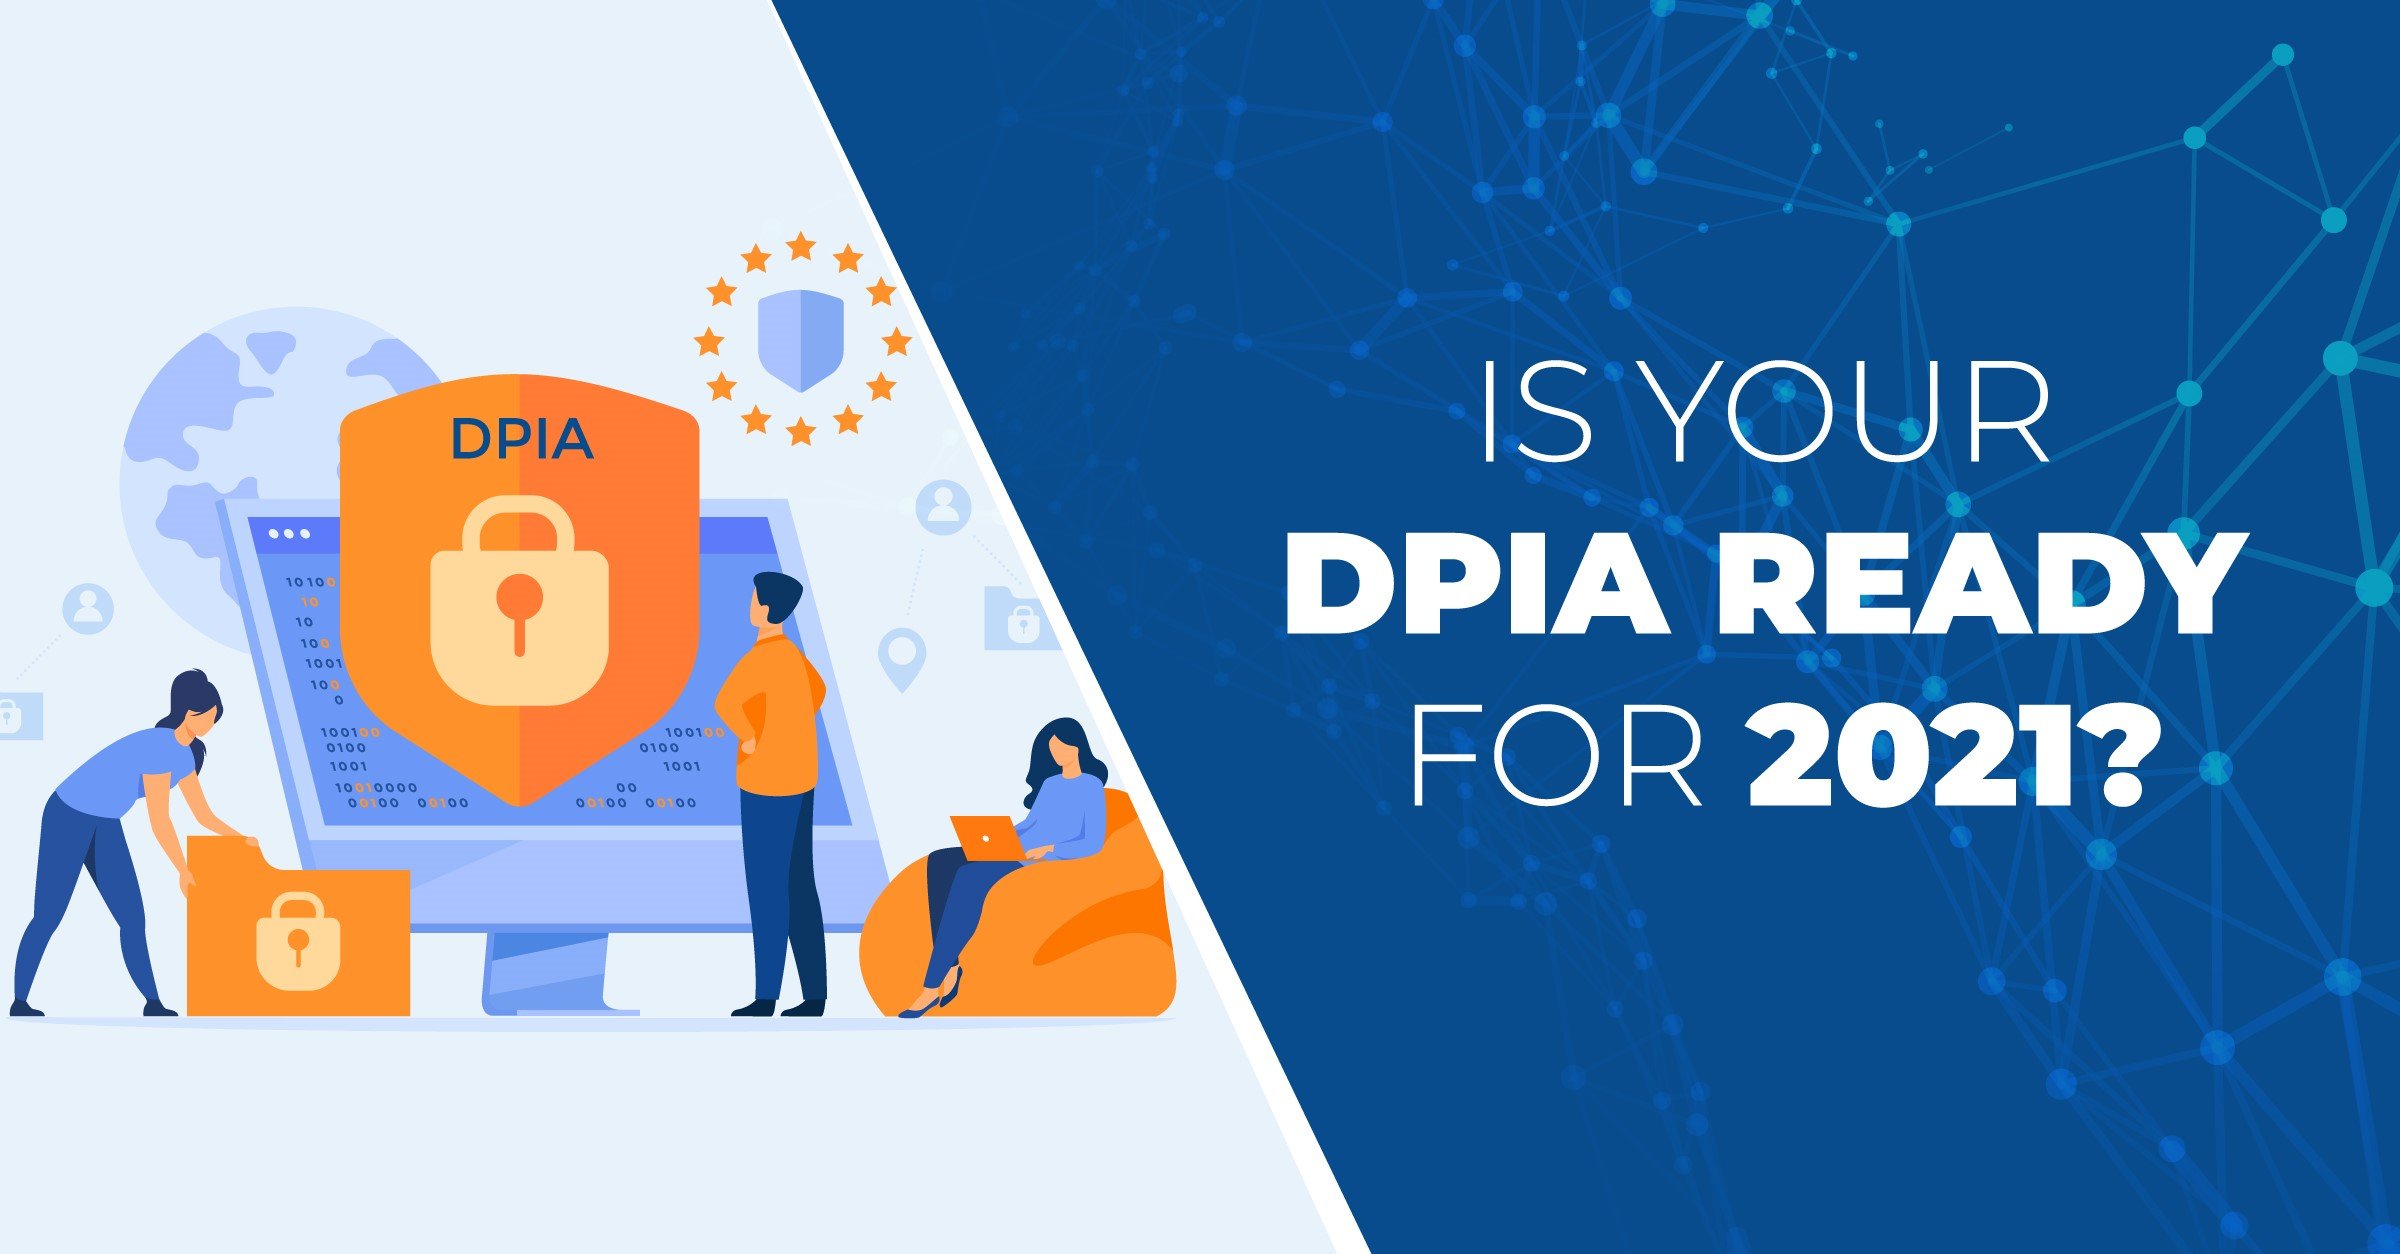 Is-your-dpia-ready-for-2021?